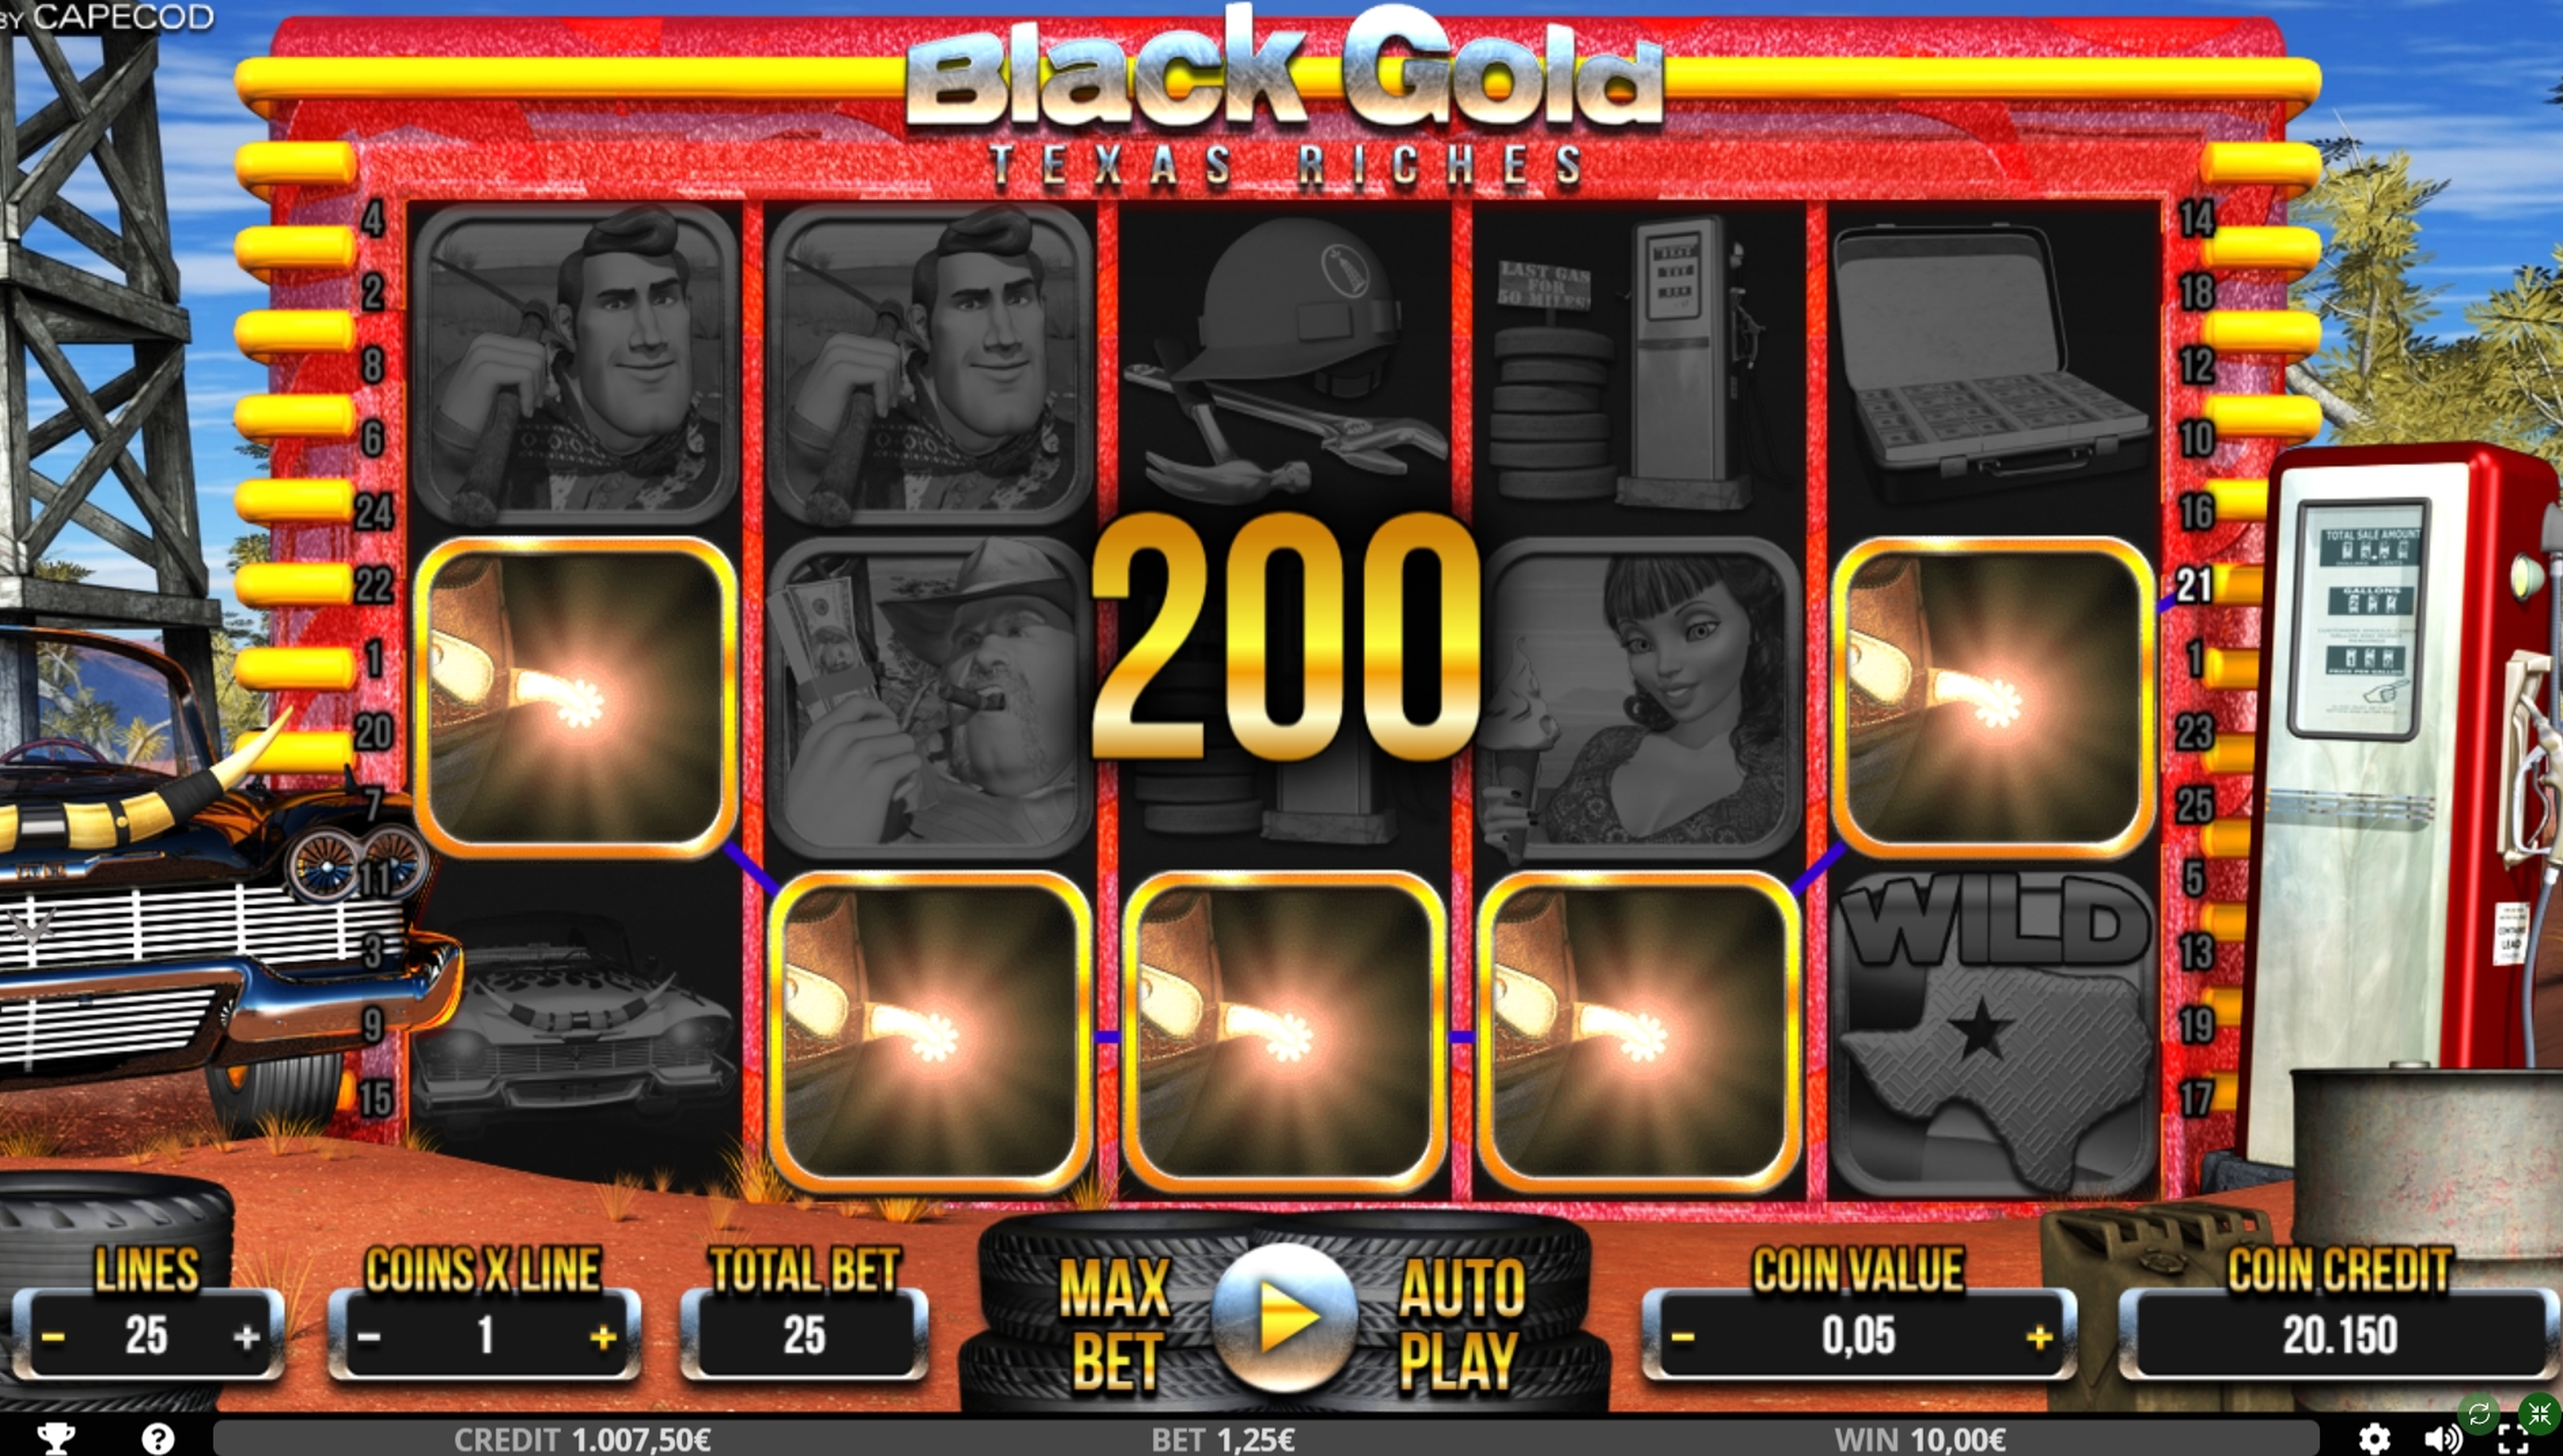 Win Money in Black Gold Texas Riches Free Slot Game by Capecod Gaming